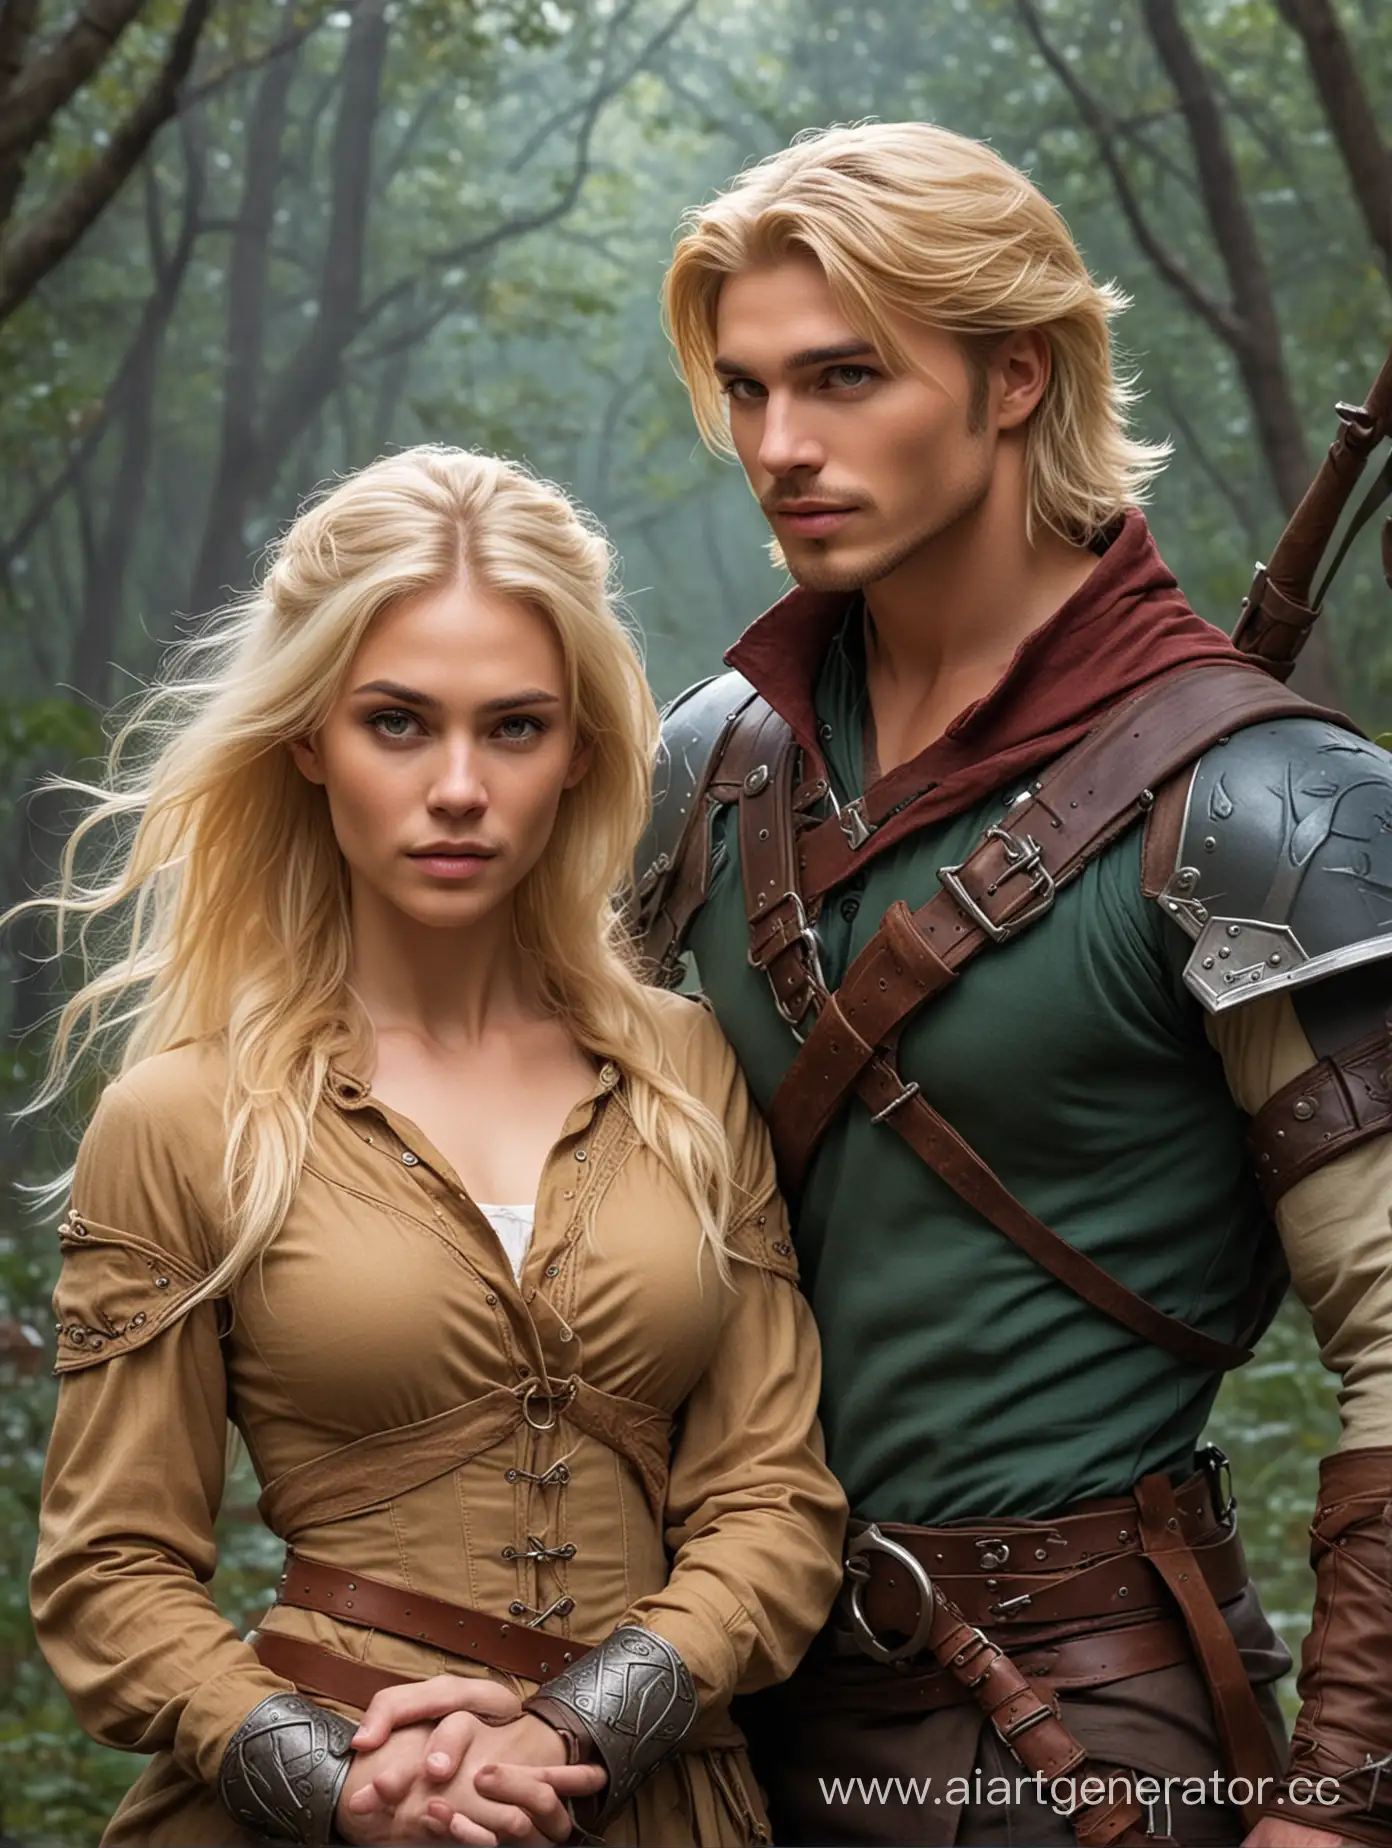 A romantic fantasy couple between a very strong female mage and a blond male ranger